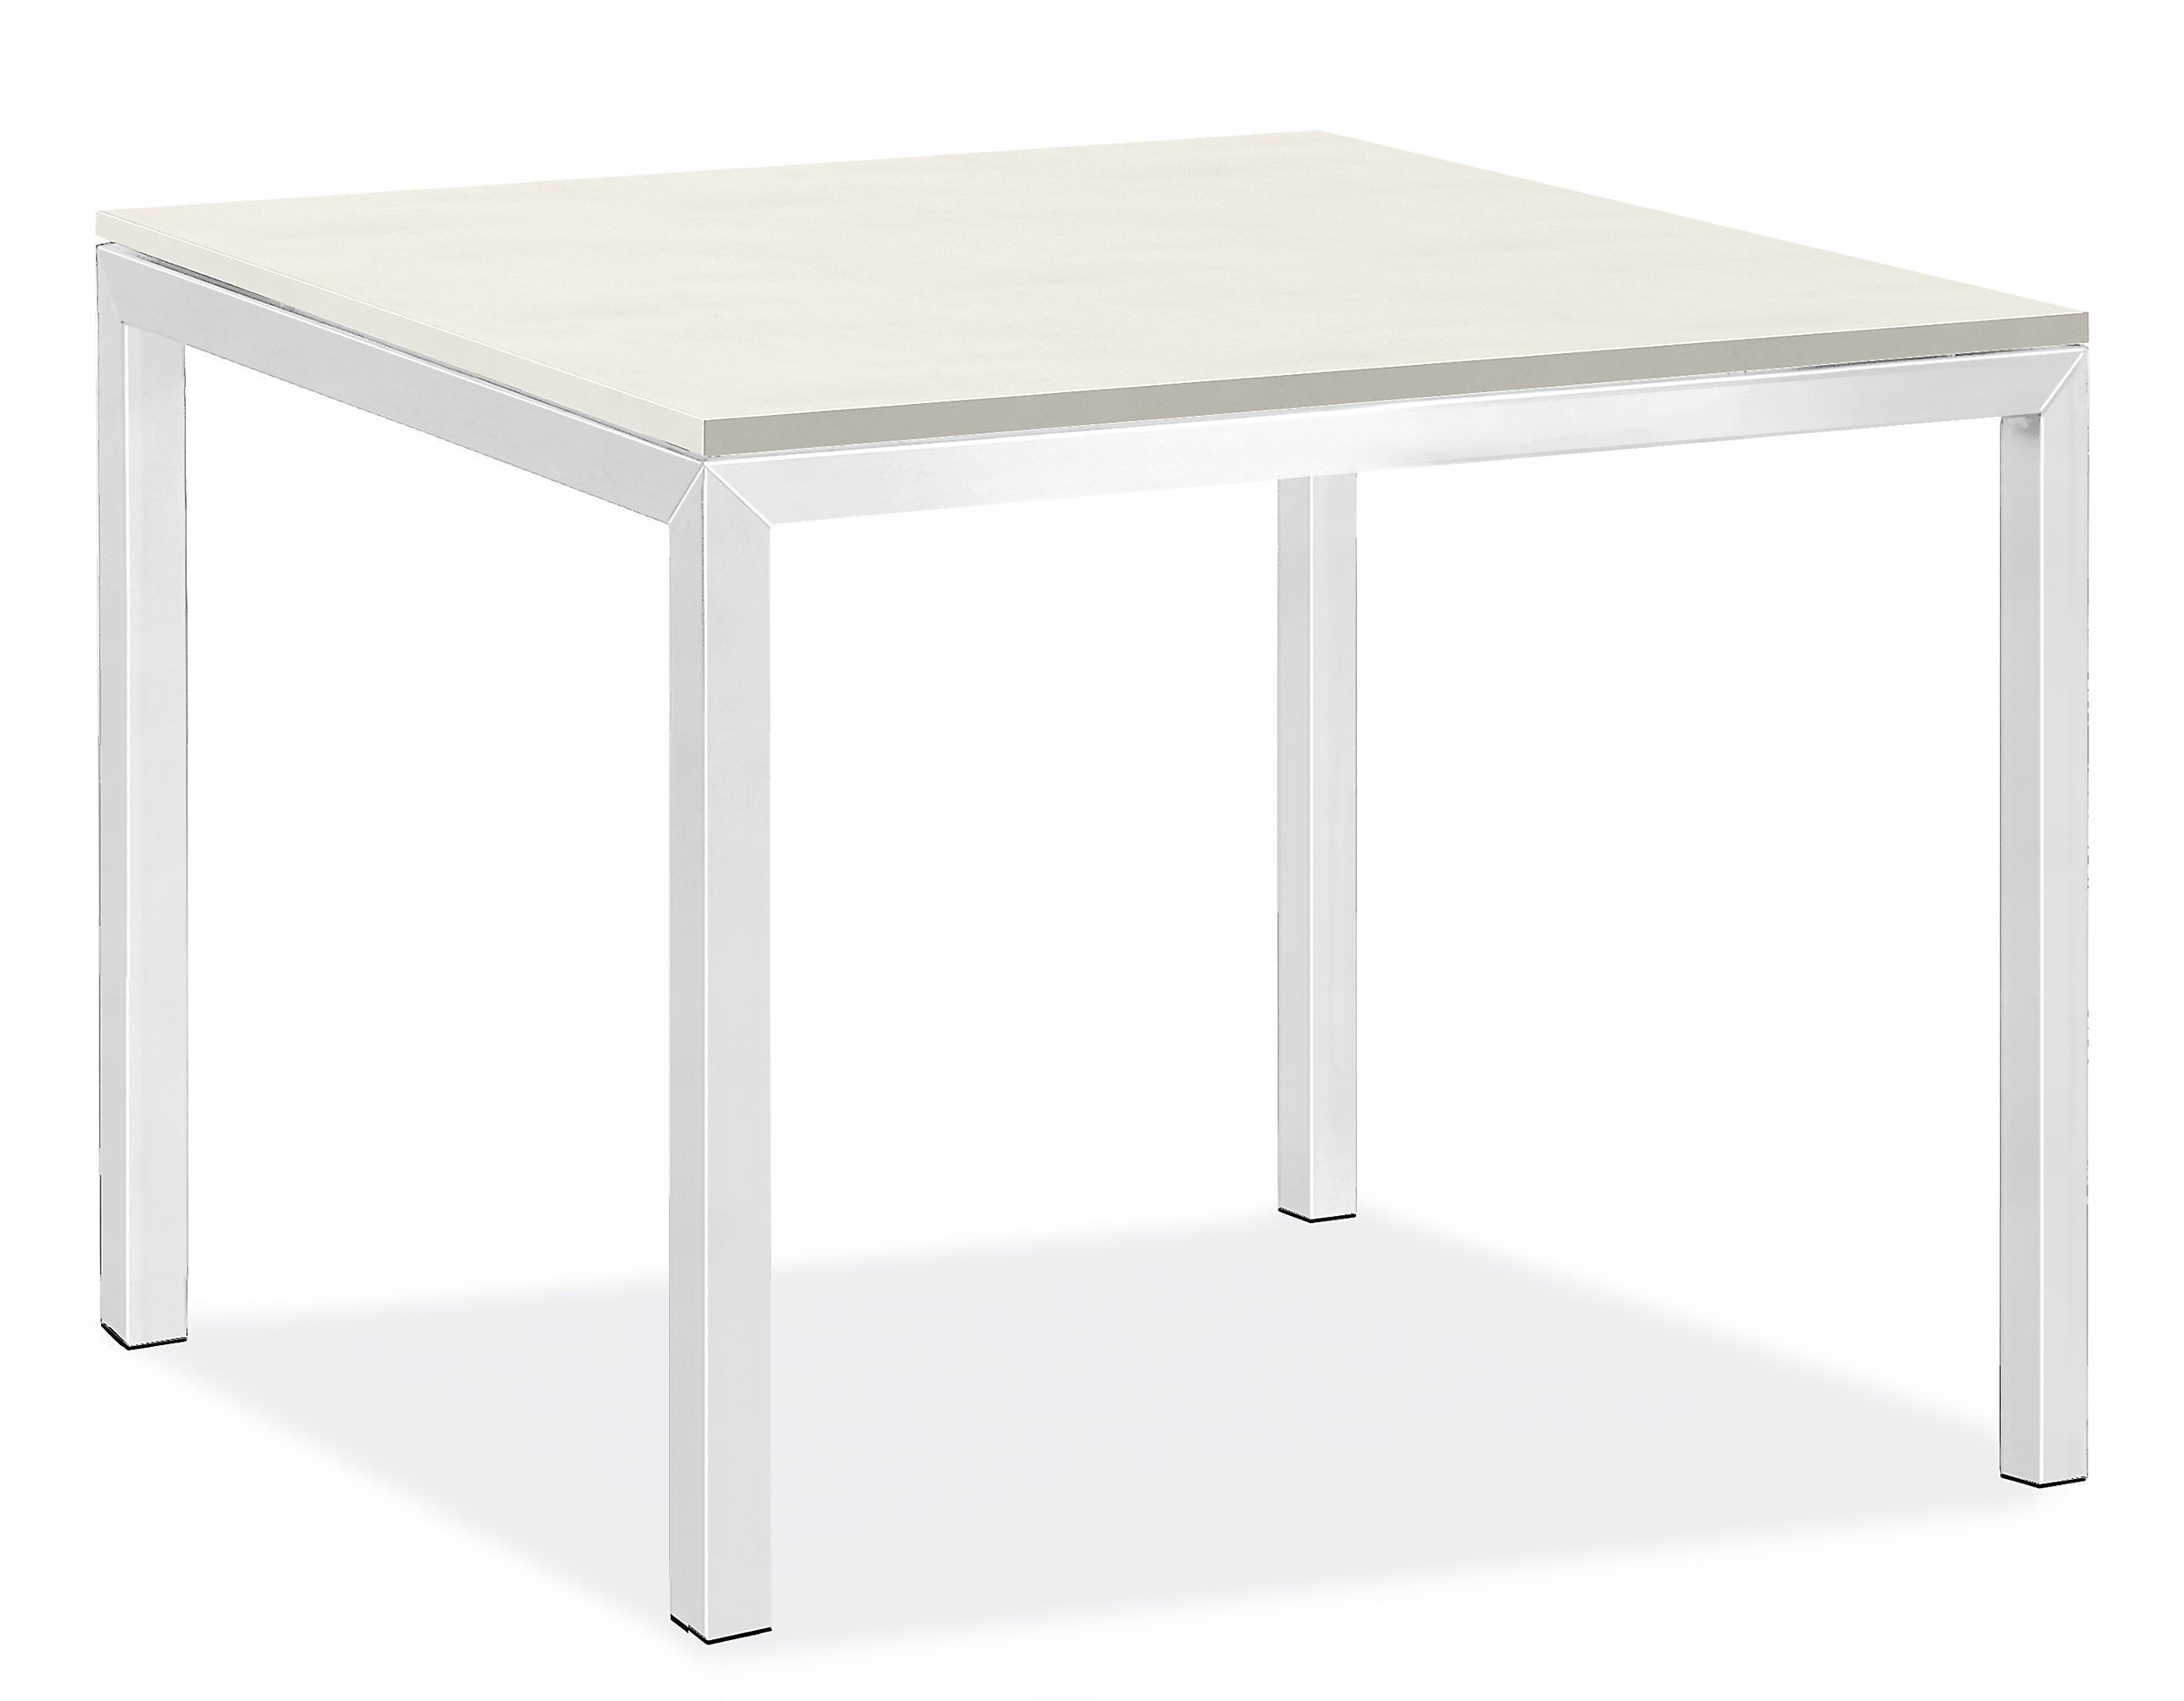 Parsons 56w 56d 29h Dining Table in 2" Stainless Steel with White Quartz Top